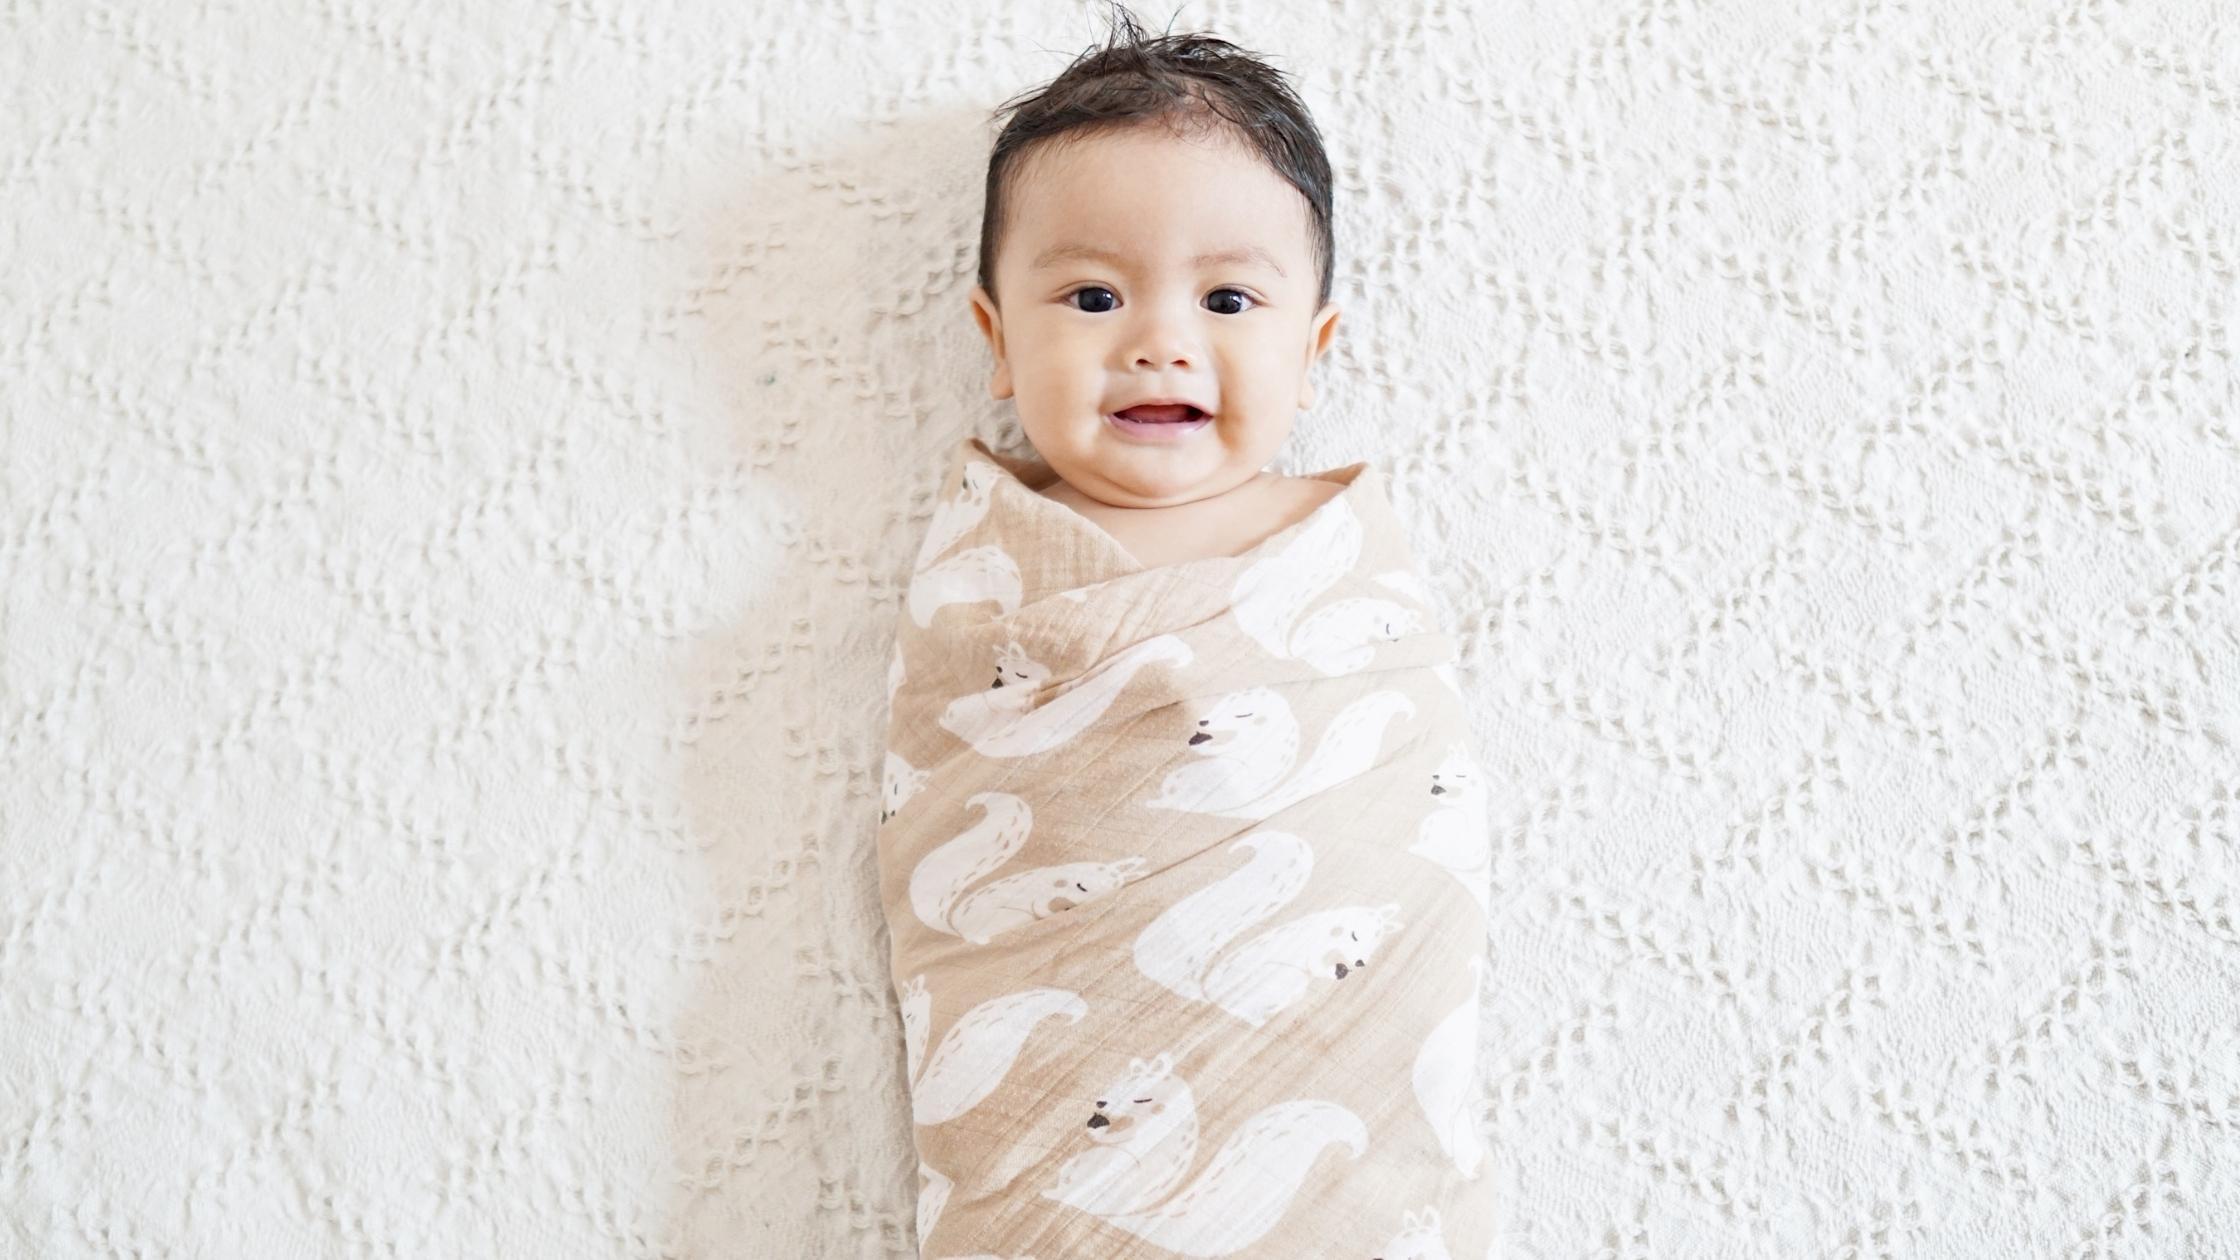 Why is Swaddling Important?